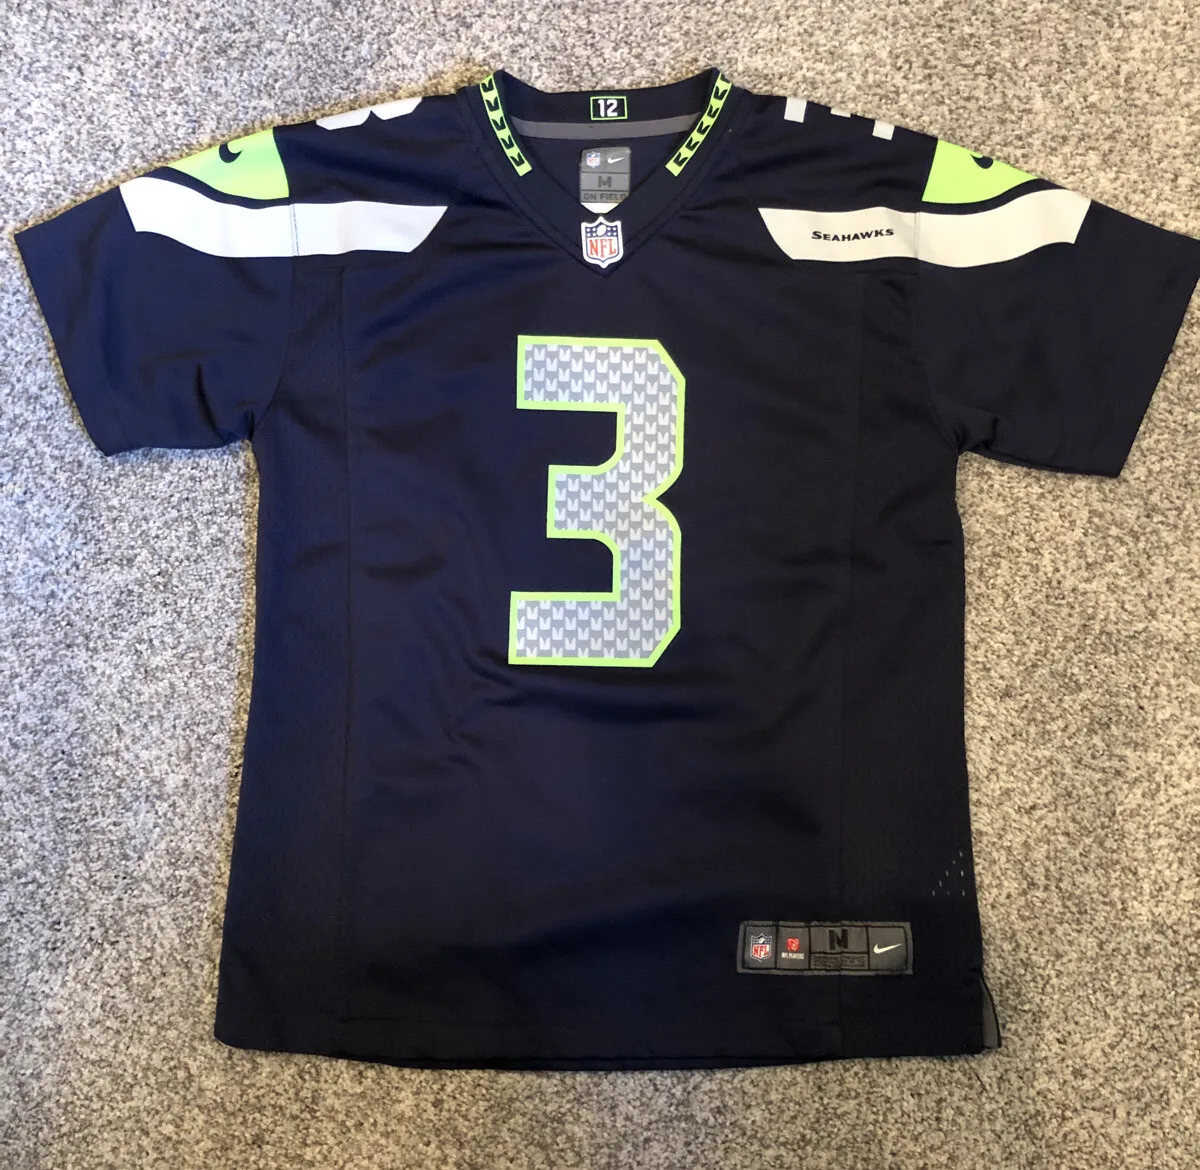 discount youth nfl jerseys